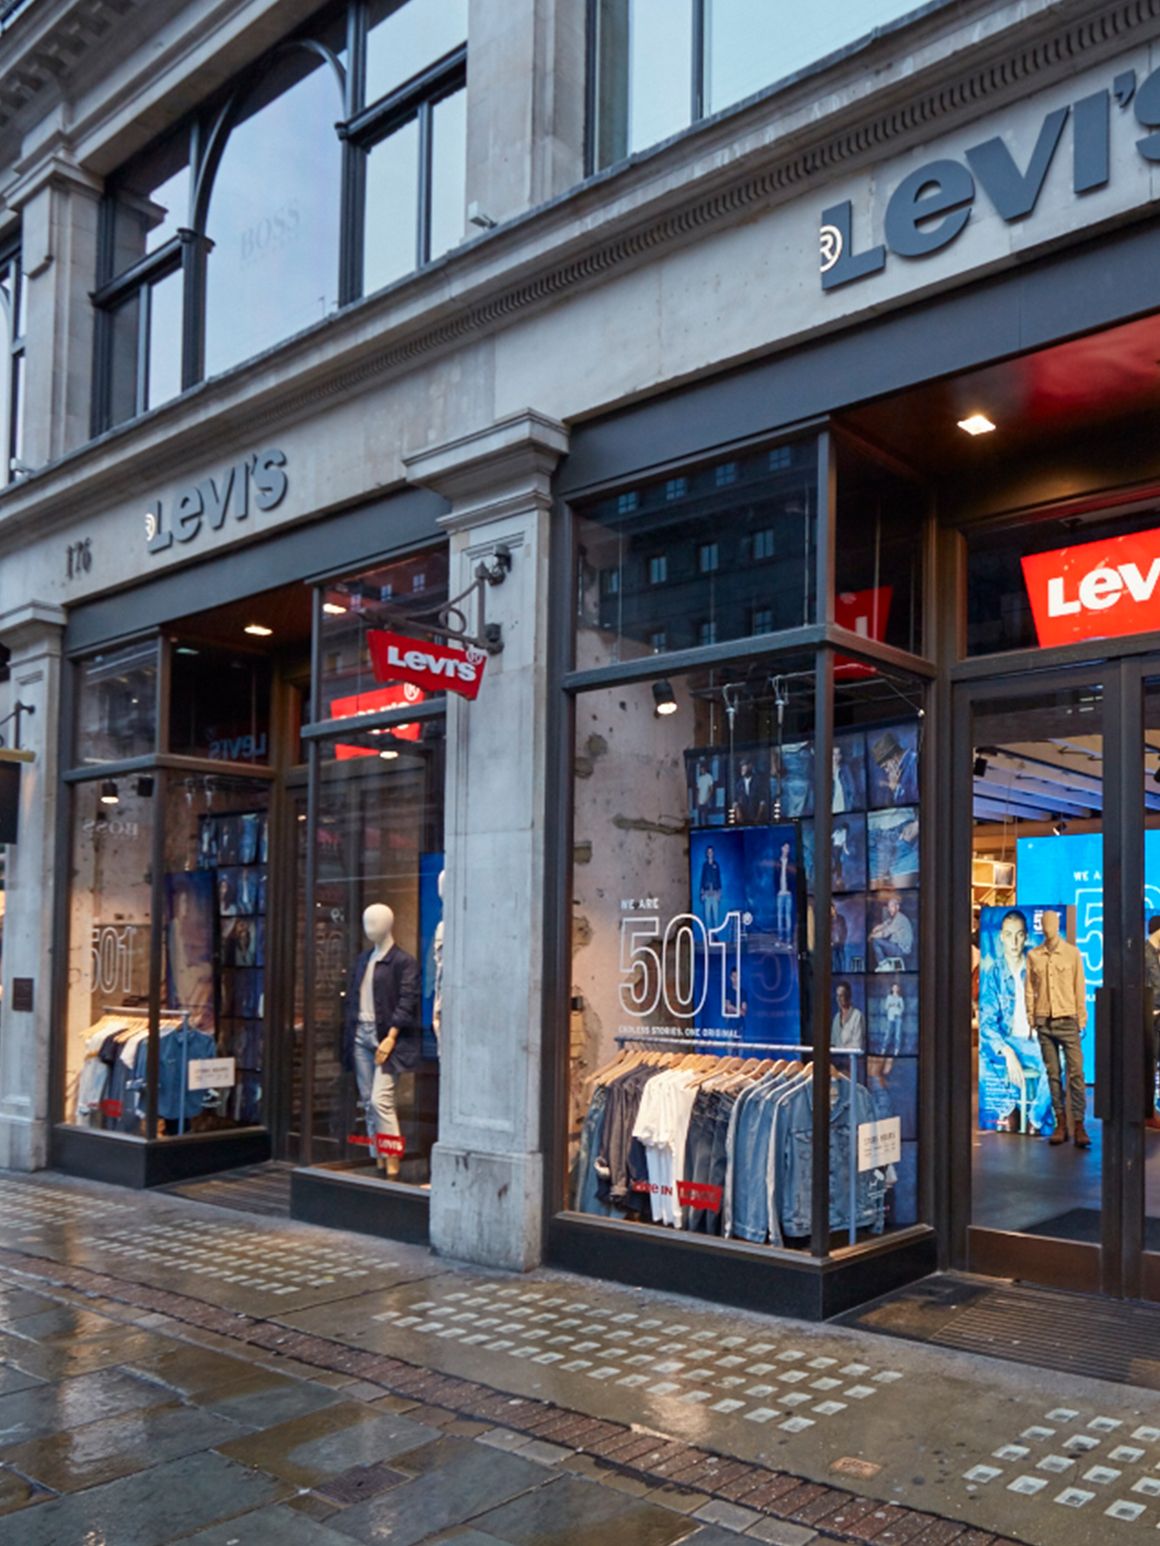 levis nottingham opening times off 65 